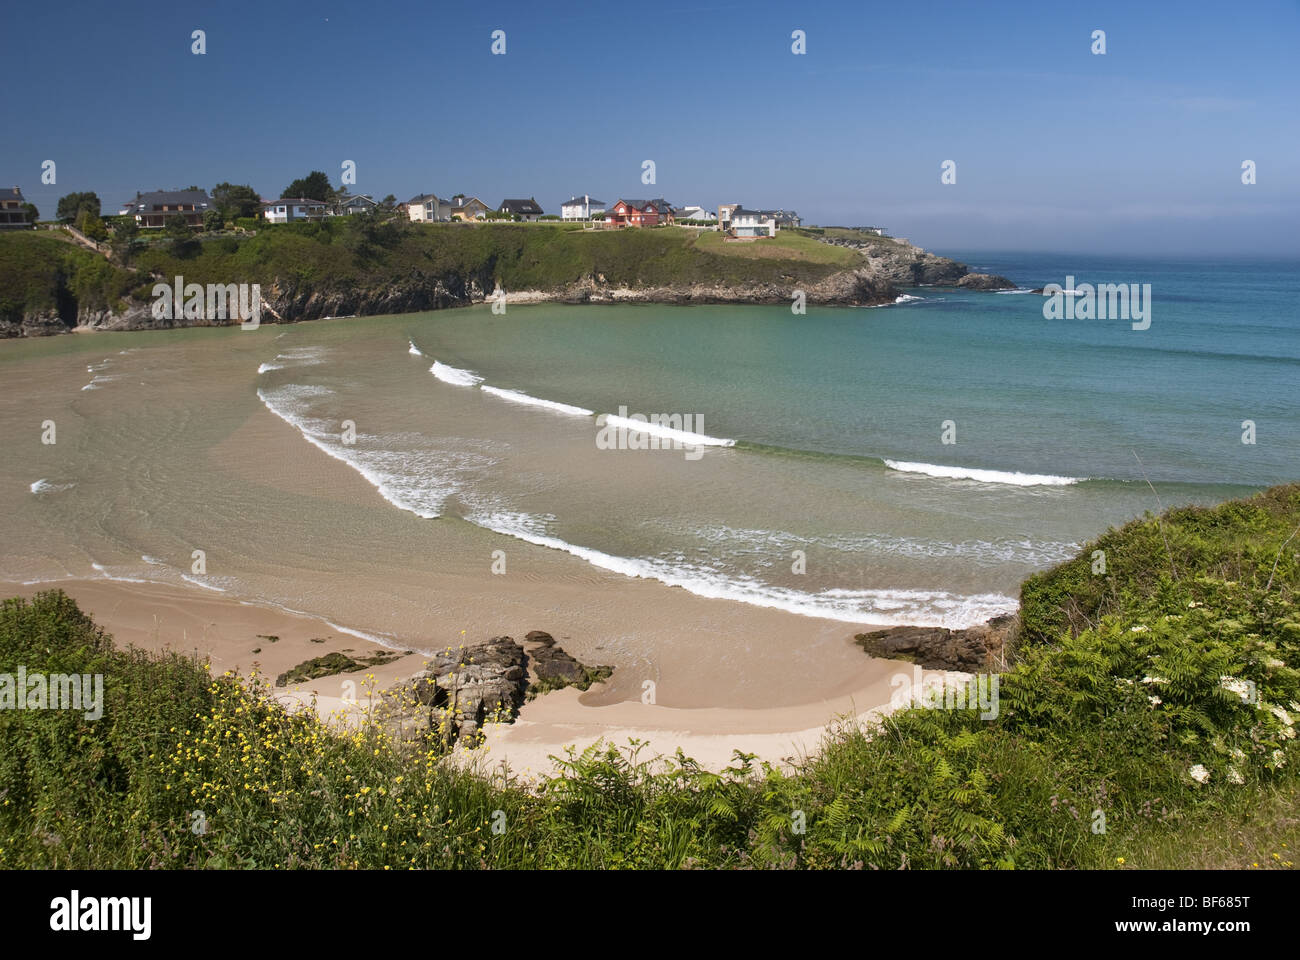 The city beach at Tapia de Casariego on the Asturias coastline of northern Spain. Stock Photo